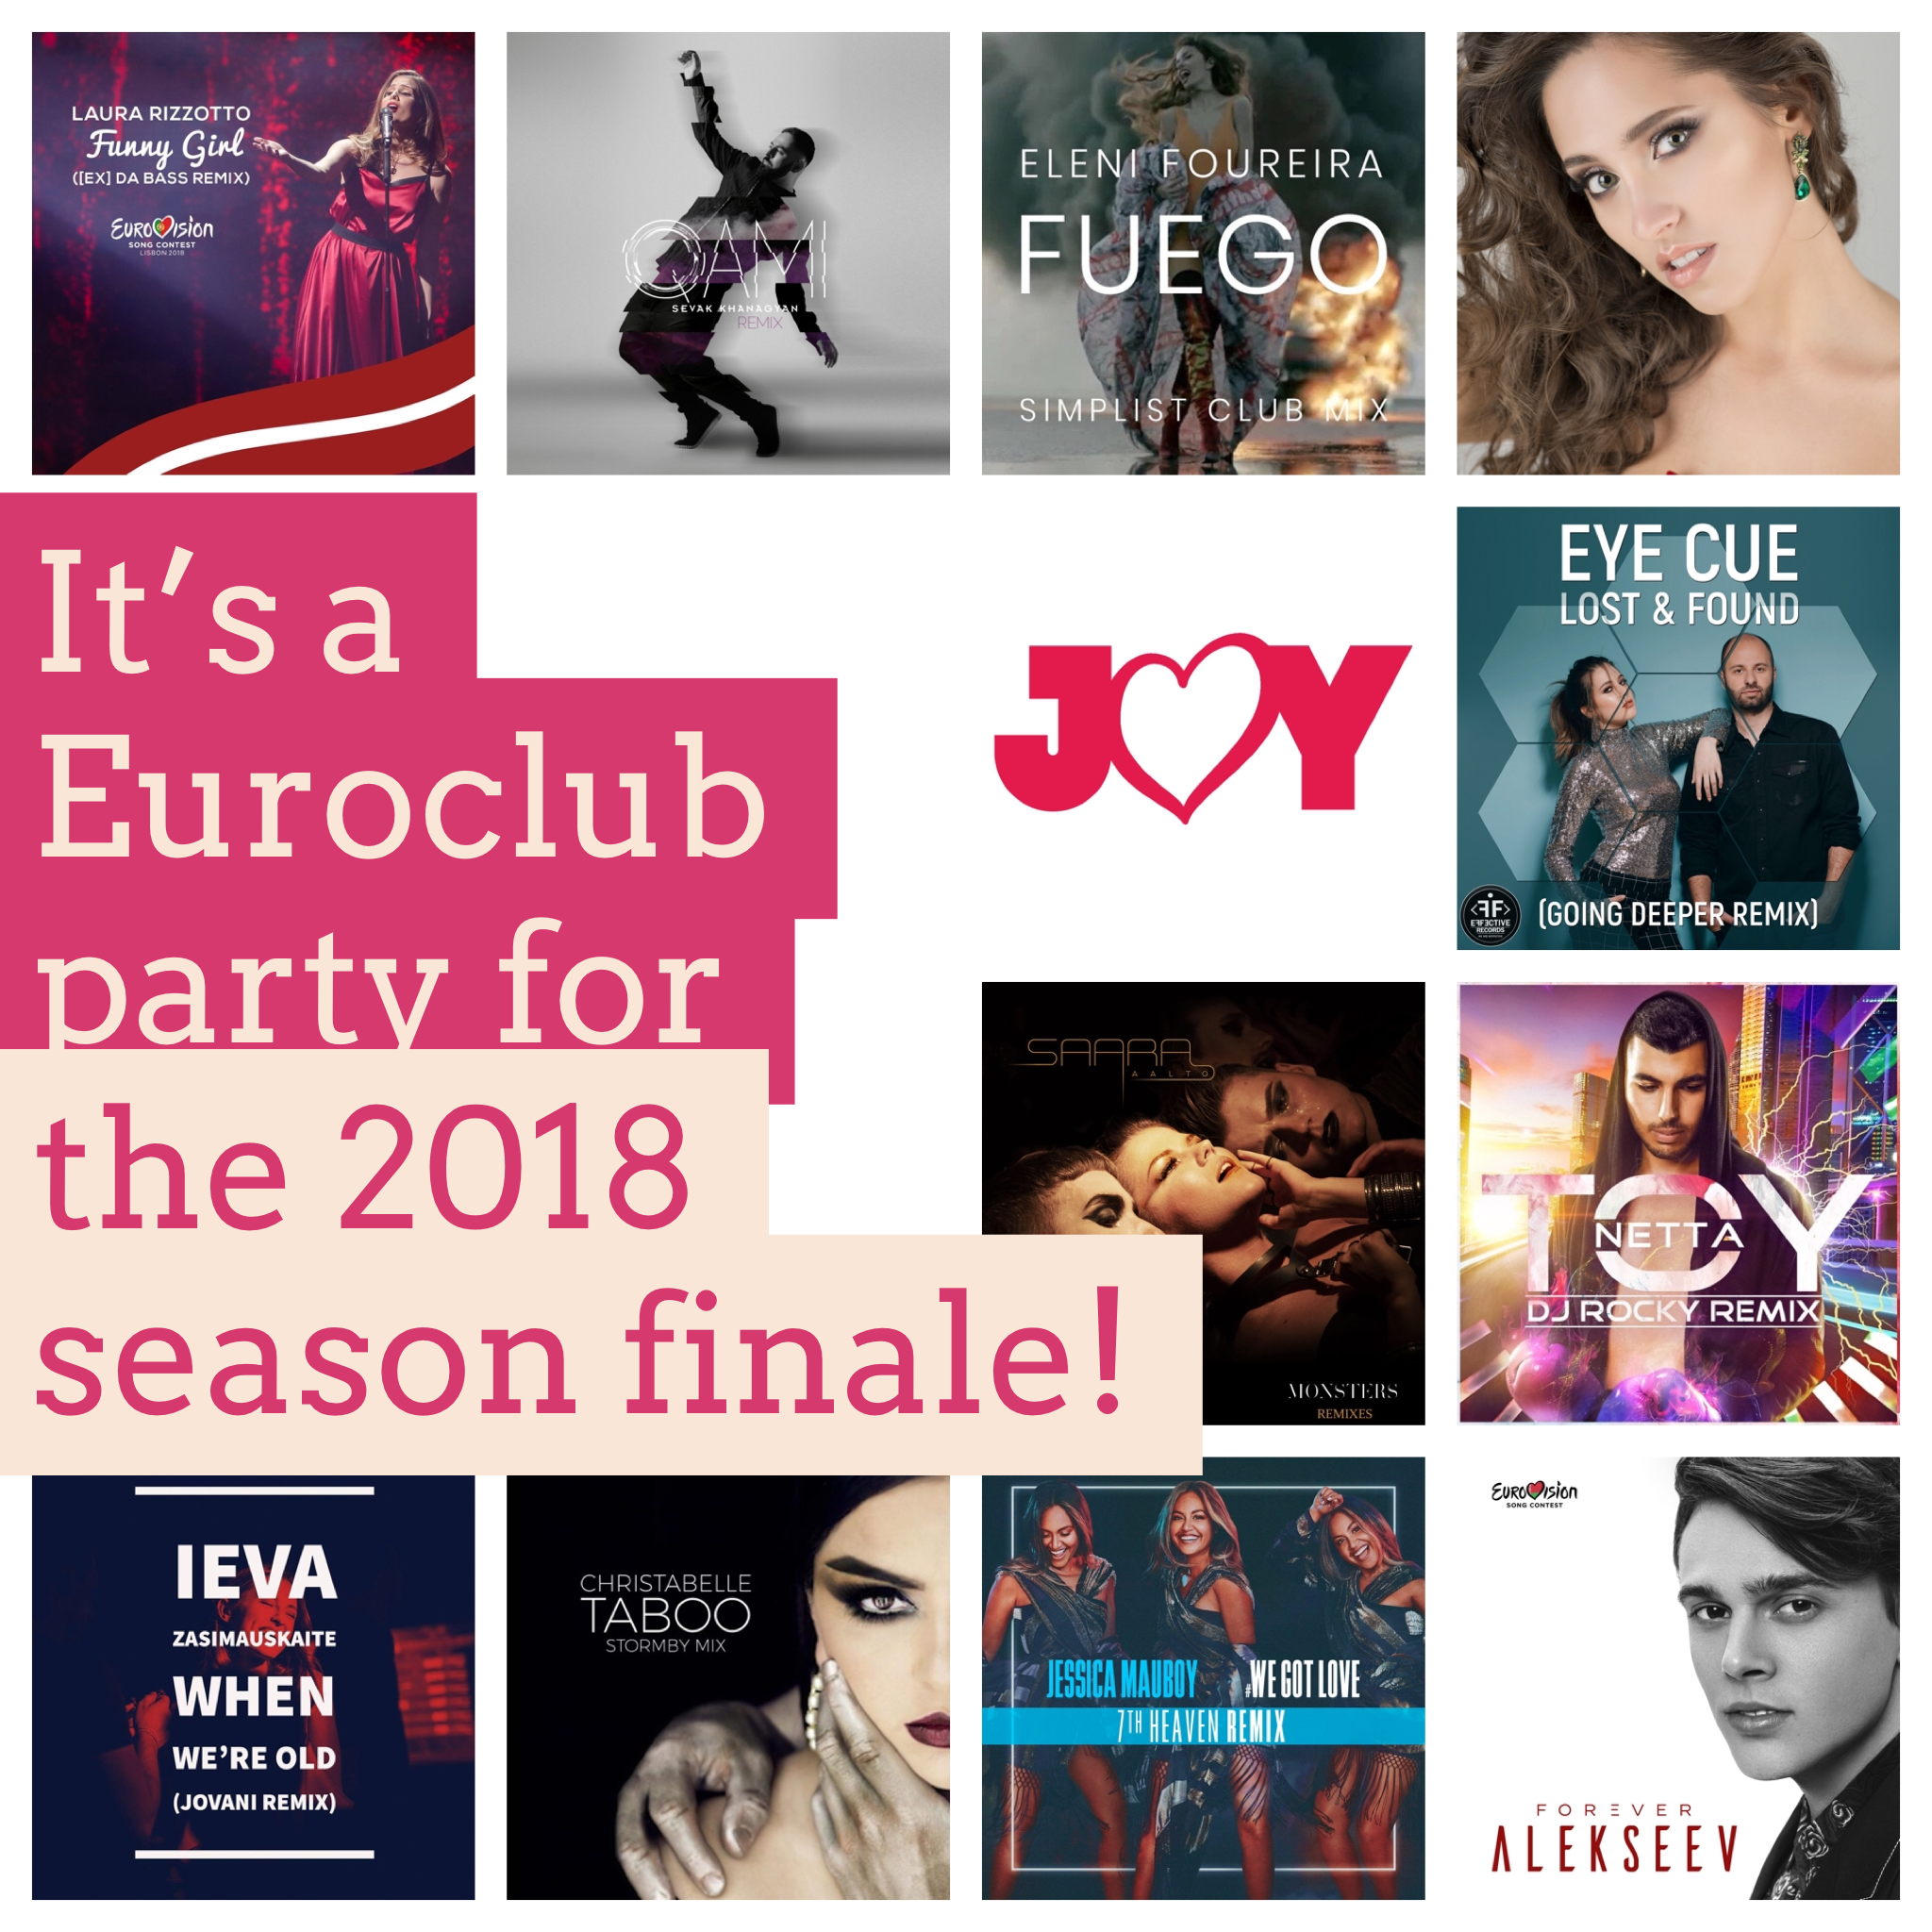 It’s a Euroclub party for the 2018 season finale!